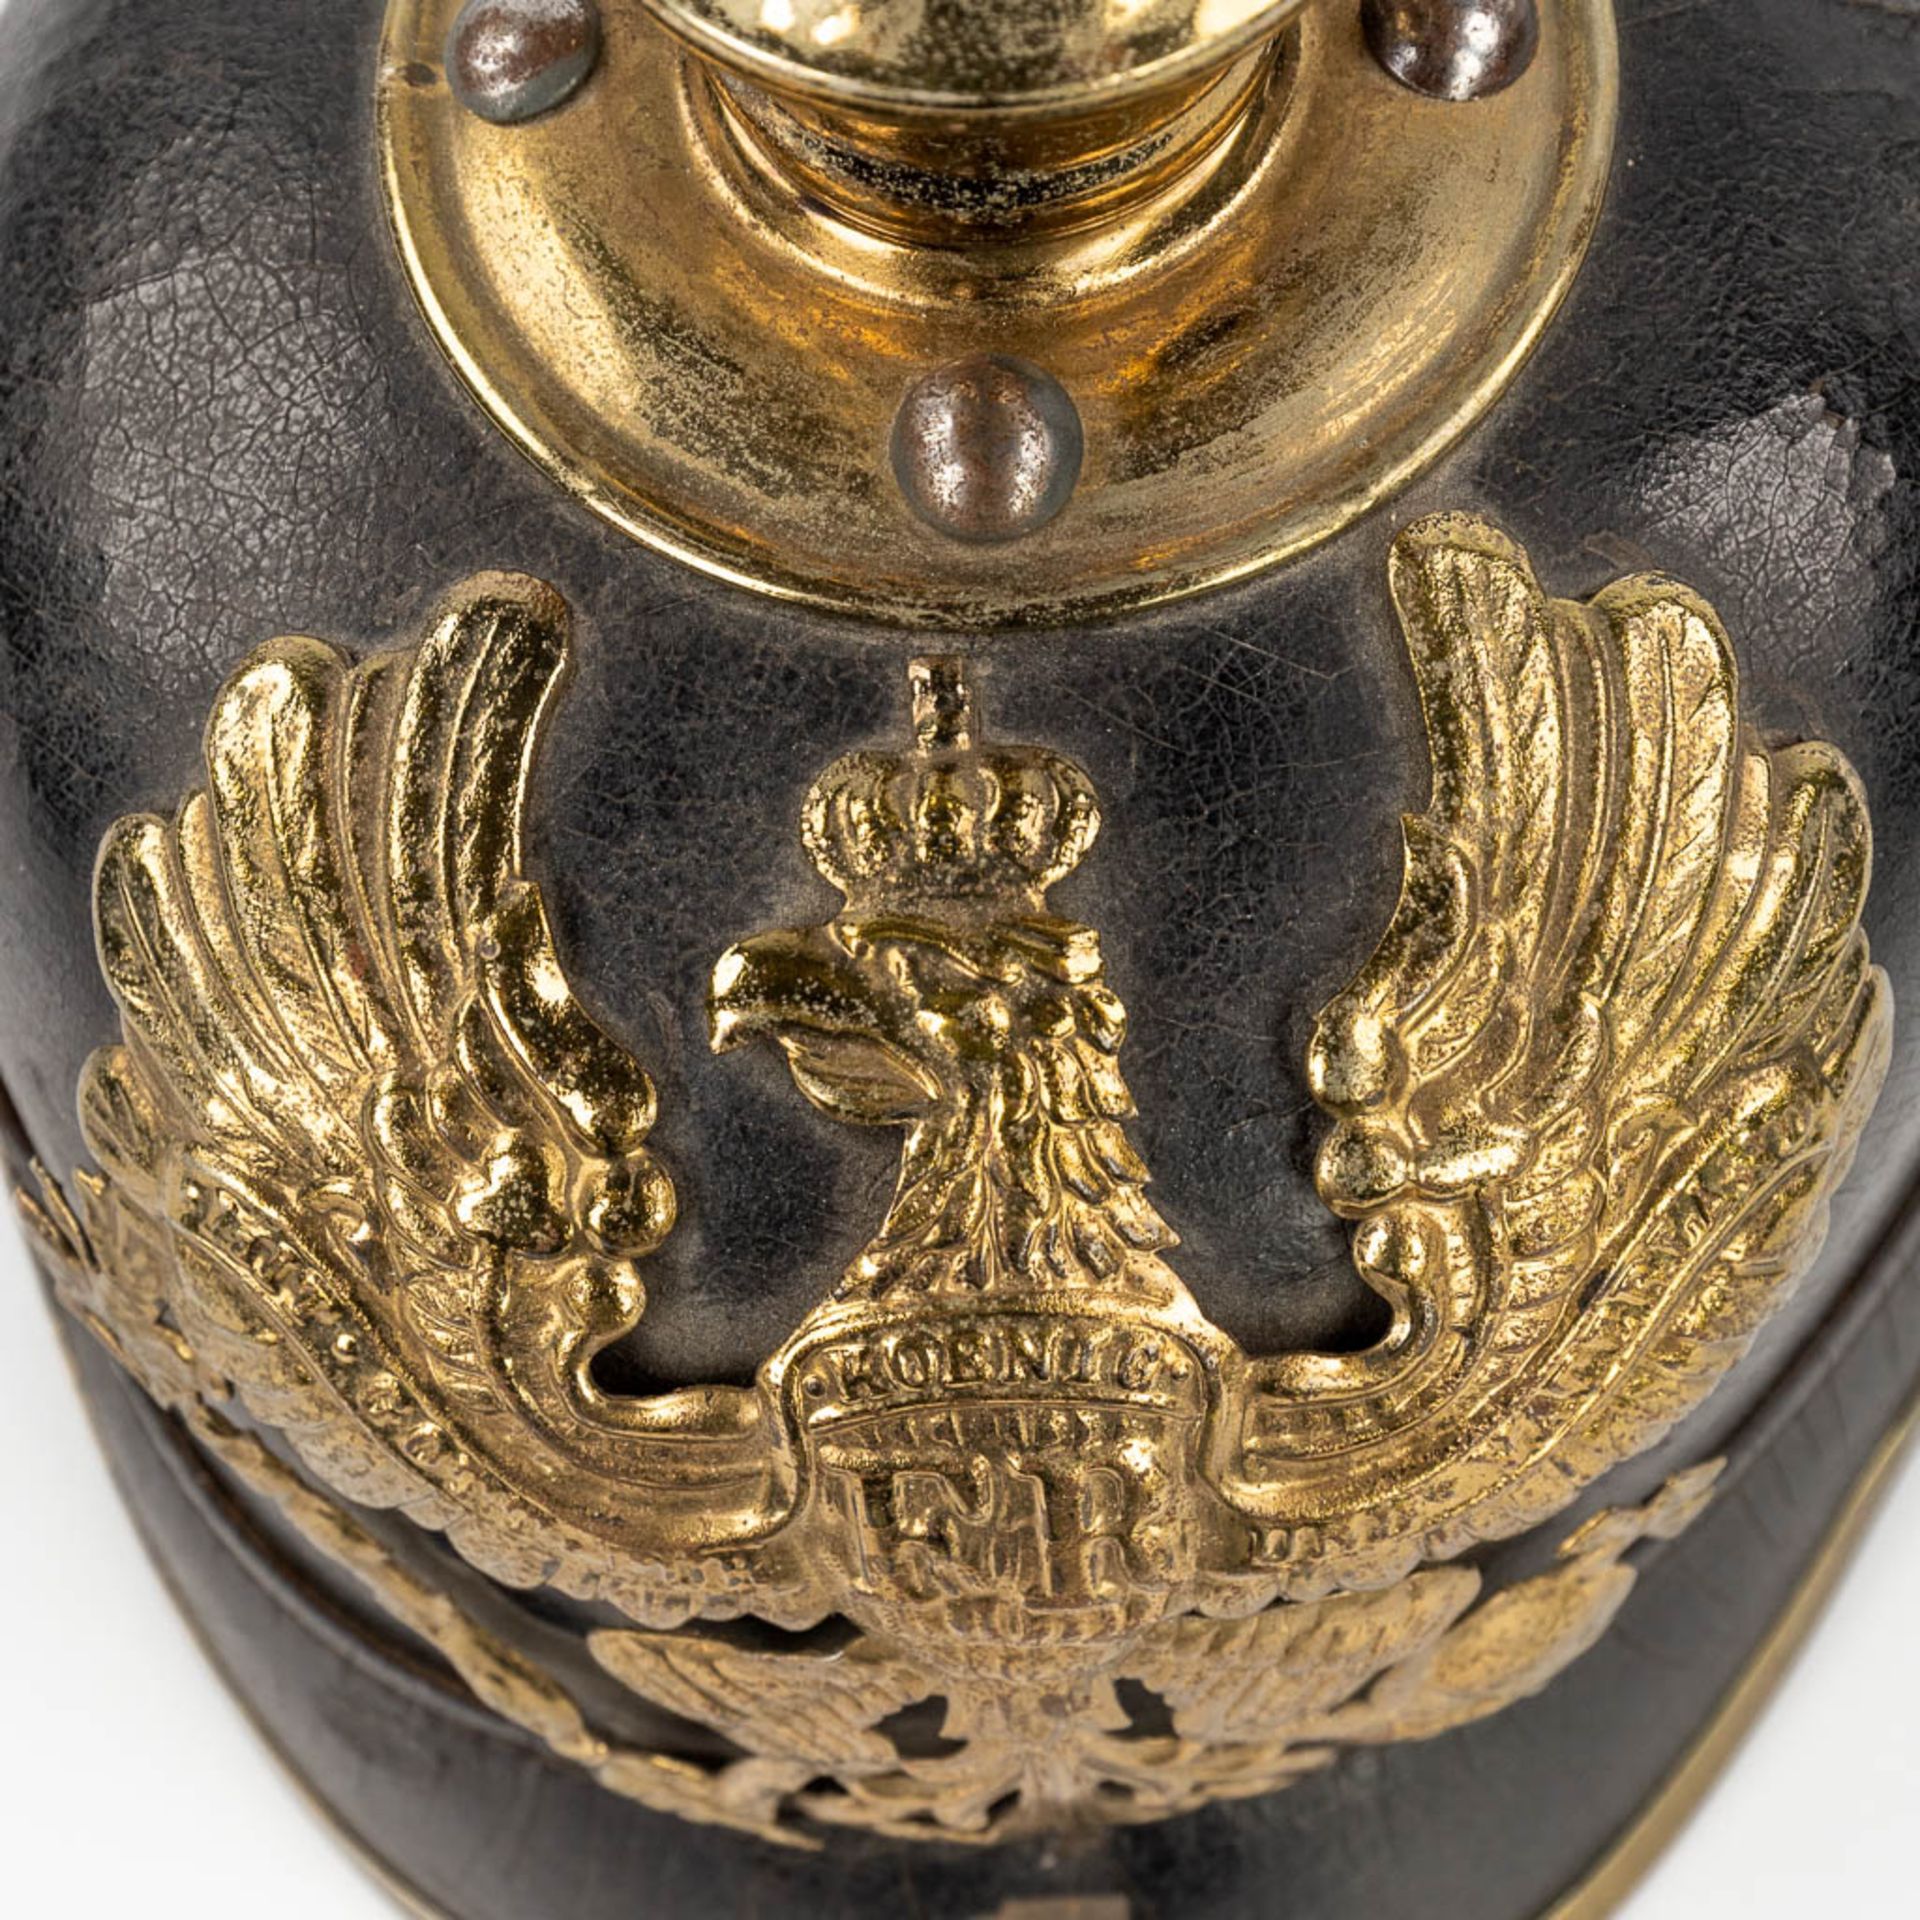 An antique German 'Pickelhaube' decorated with an eagle. Dating 1914-1918. (L:25 x W:18 x H:21 cm) - Bild 16 aus 17